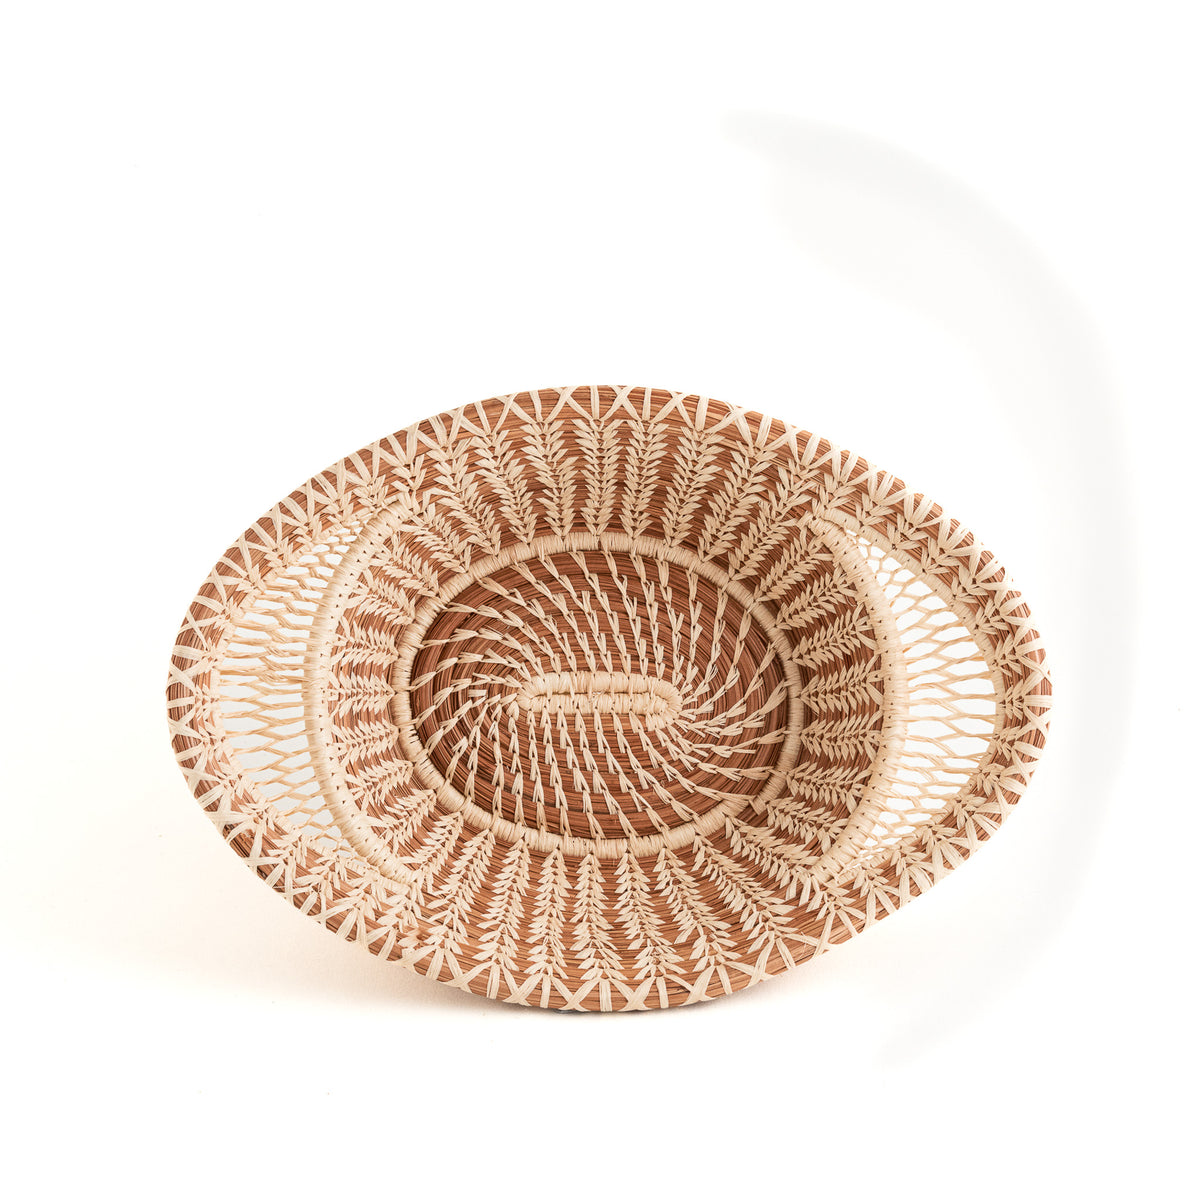 Pine Needle Basket with Lacy Handles top view